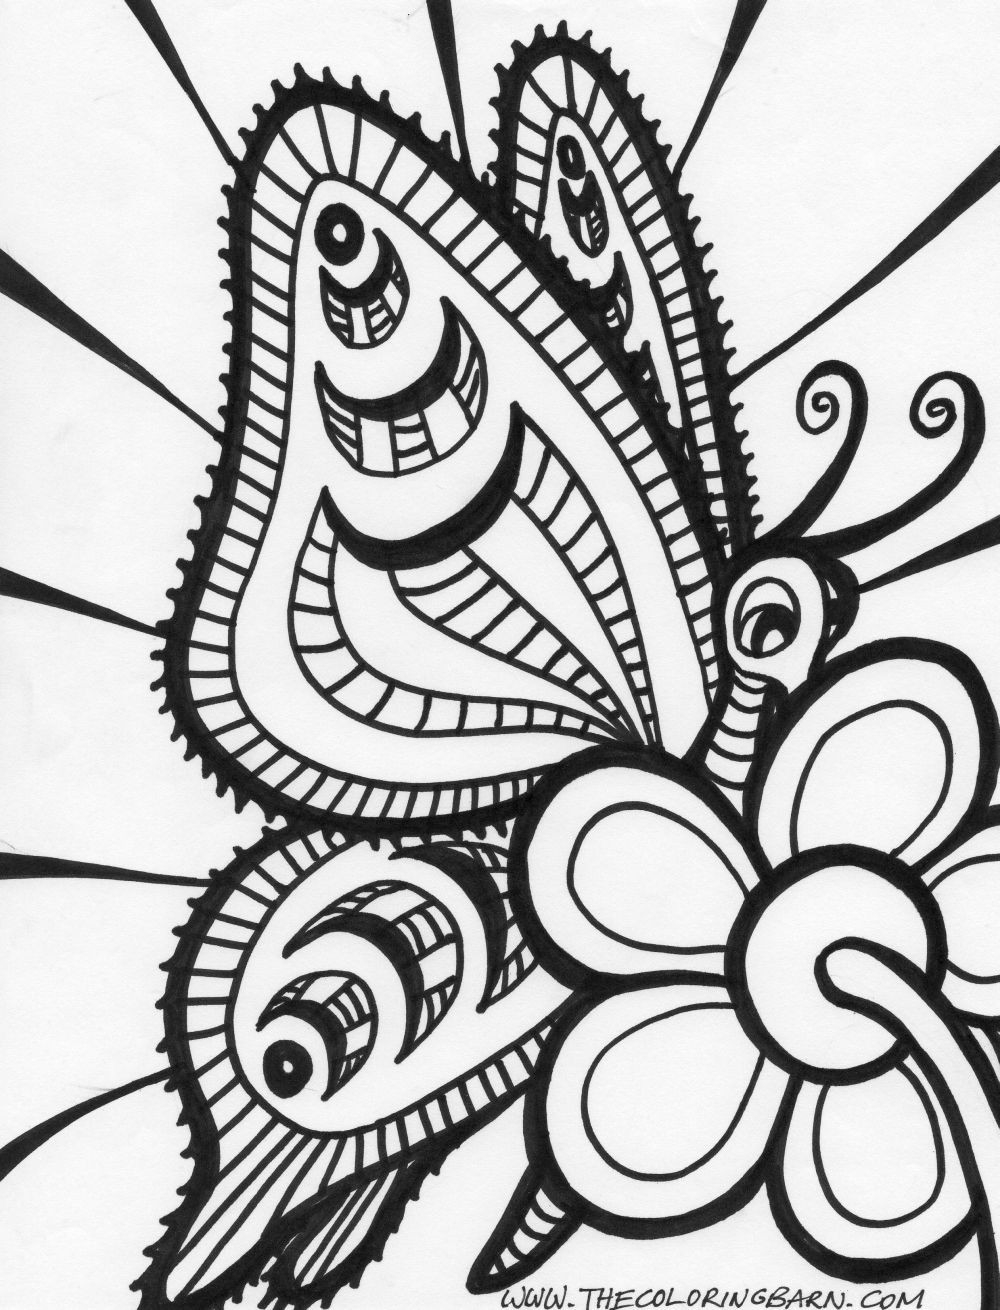 Big Coloring Pages For Adults
 coloring sheets for adults Free